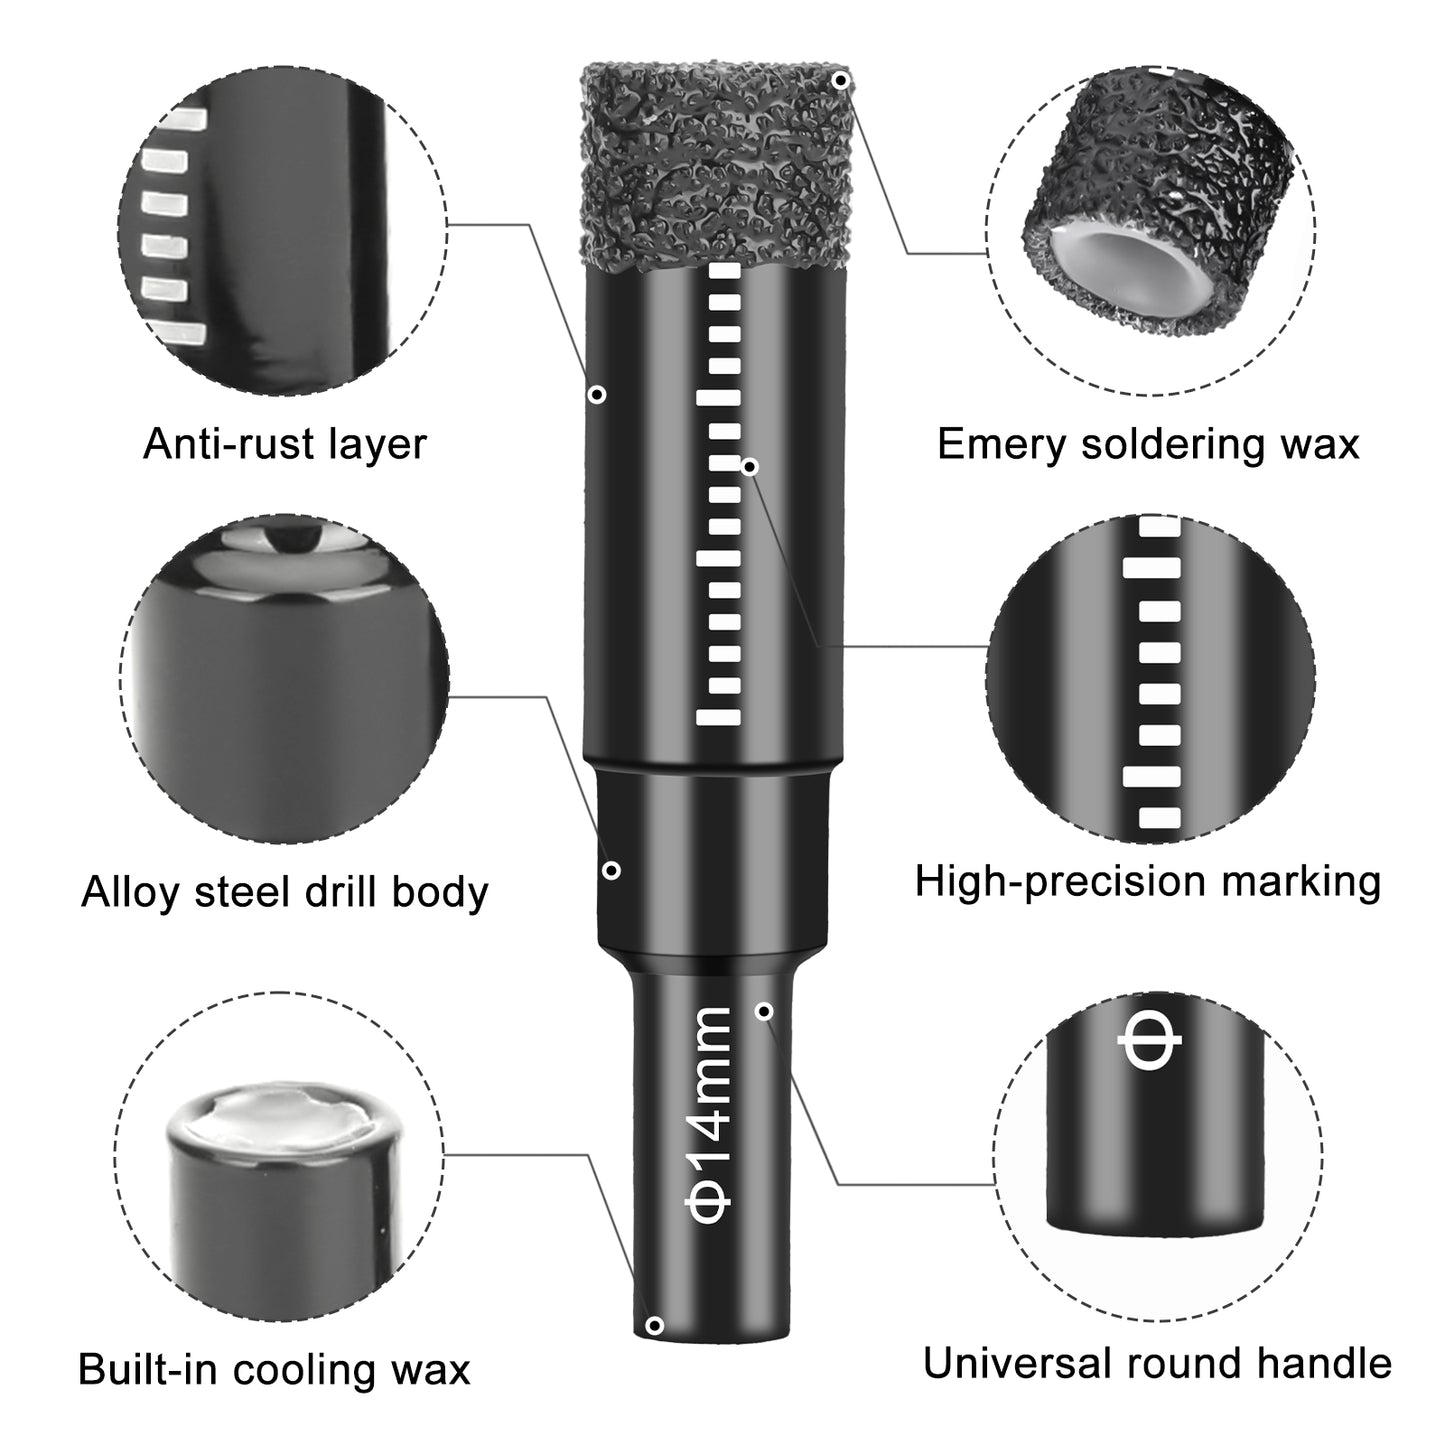 5 pcs Diamond Drill Bits Set-Core Drill Bits for Hard Materials - Ideal for drilling in tough materials like tiles, porcelain, granite, ceramic, glass, mirrors, marble, stone, masonry, and brick (not suitable for wood)，Sizes 6mm, 8mm, 10mm, 12mm, and 14mm